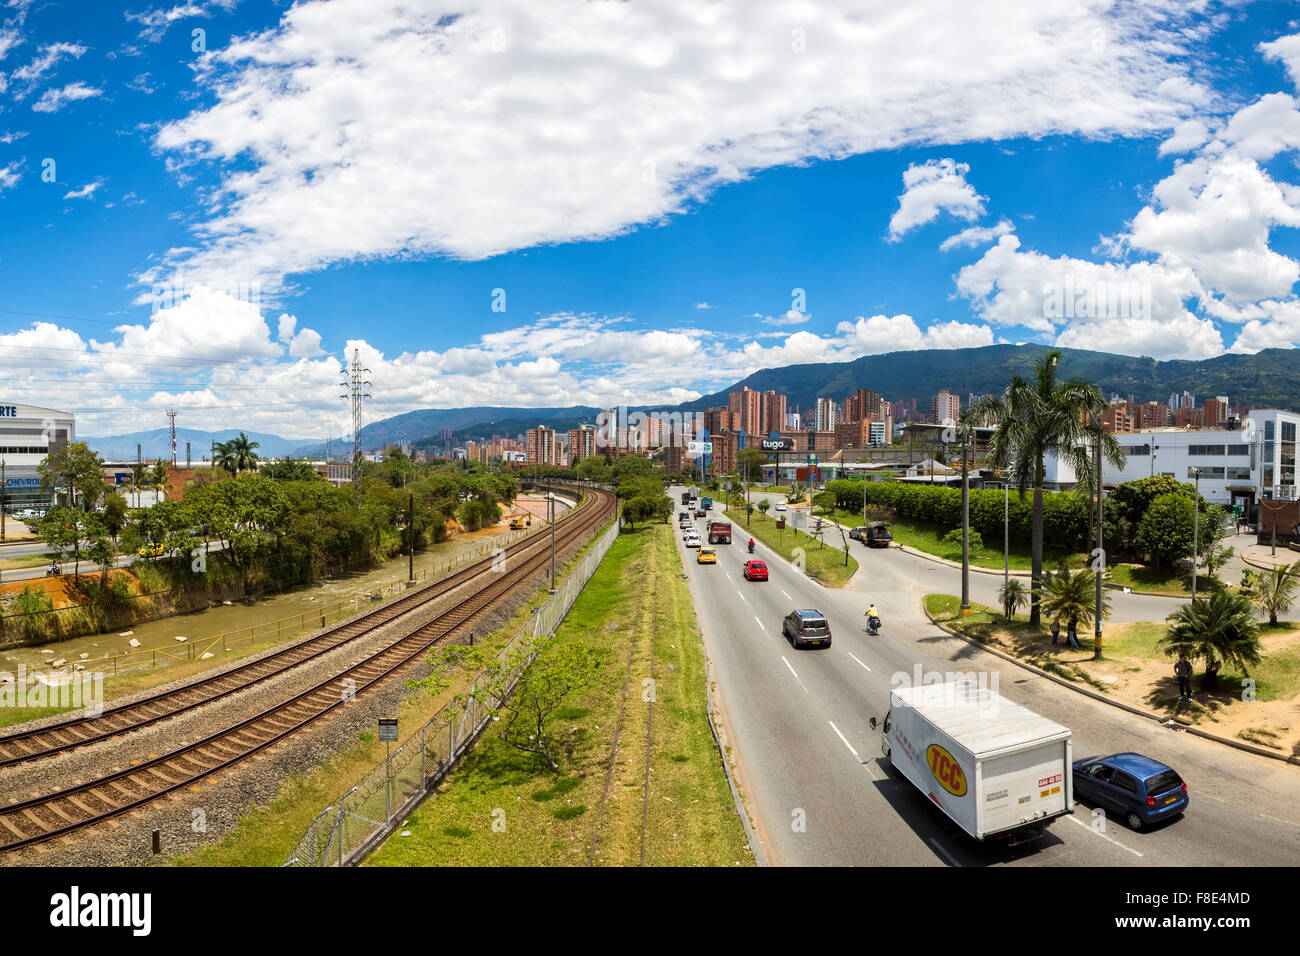 Outdoors view of the Medellin metro line with train, railway tracks, river and cityscape with traffic on the road. Colombia 2015 Stock Photo